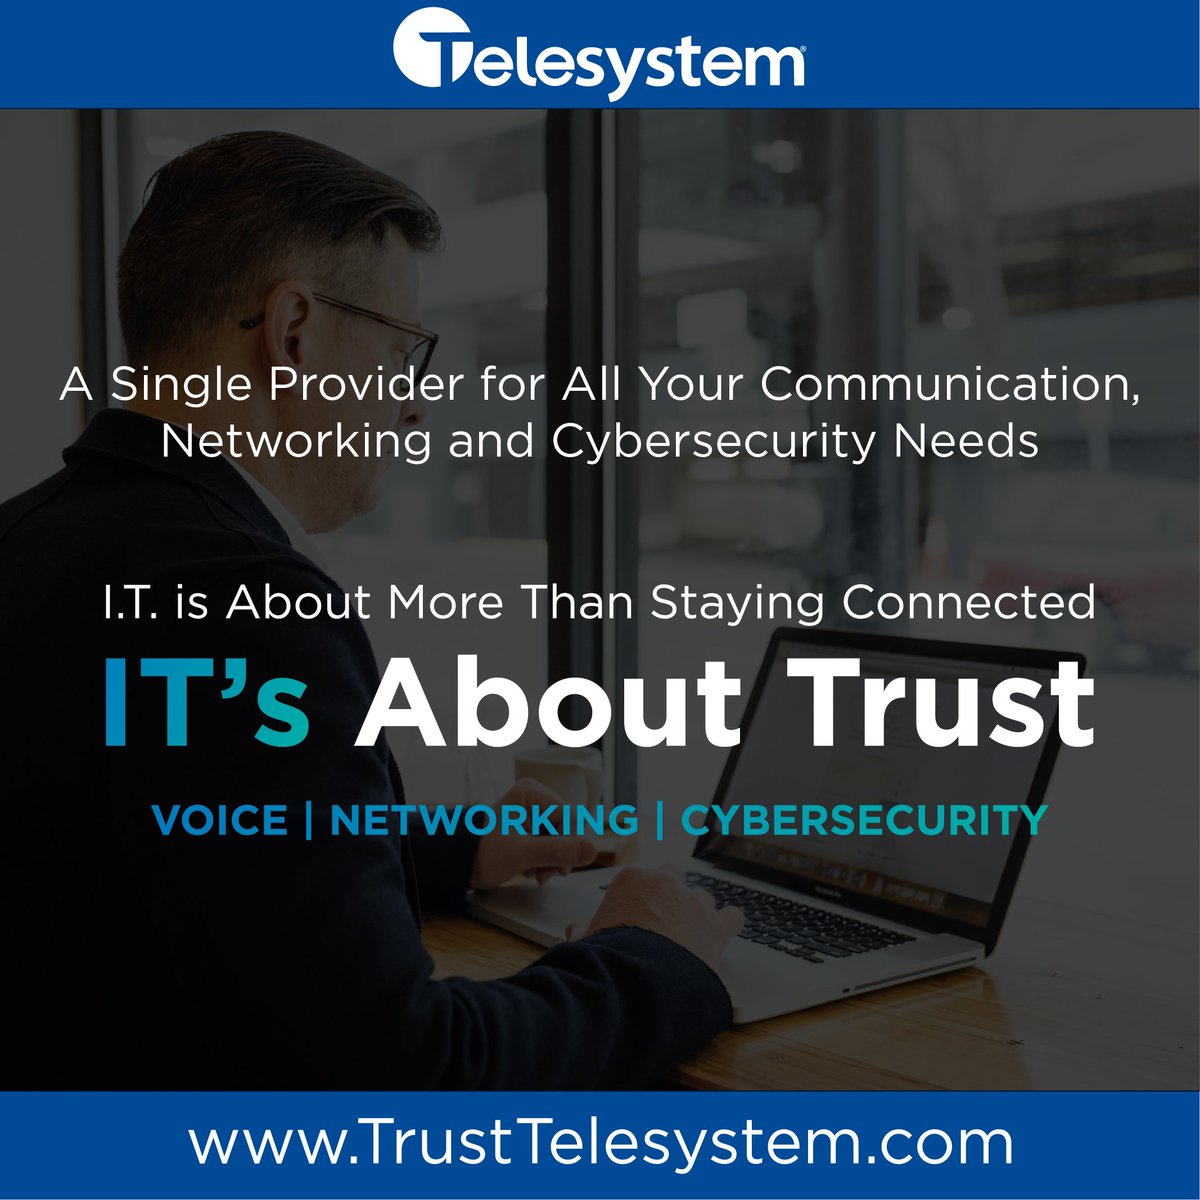 Stop responding to threats and start preventing them.
Start protecting your business today - hubs.la/Q01zPBKM0
#TrustTelesystem #Cybersecurity #DDoS #Phishing #Malware #EndpointProtection #ThreatProtector #Ransomware